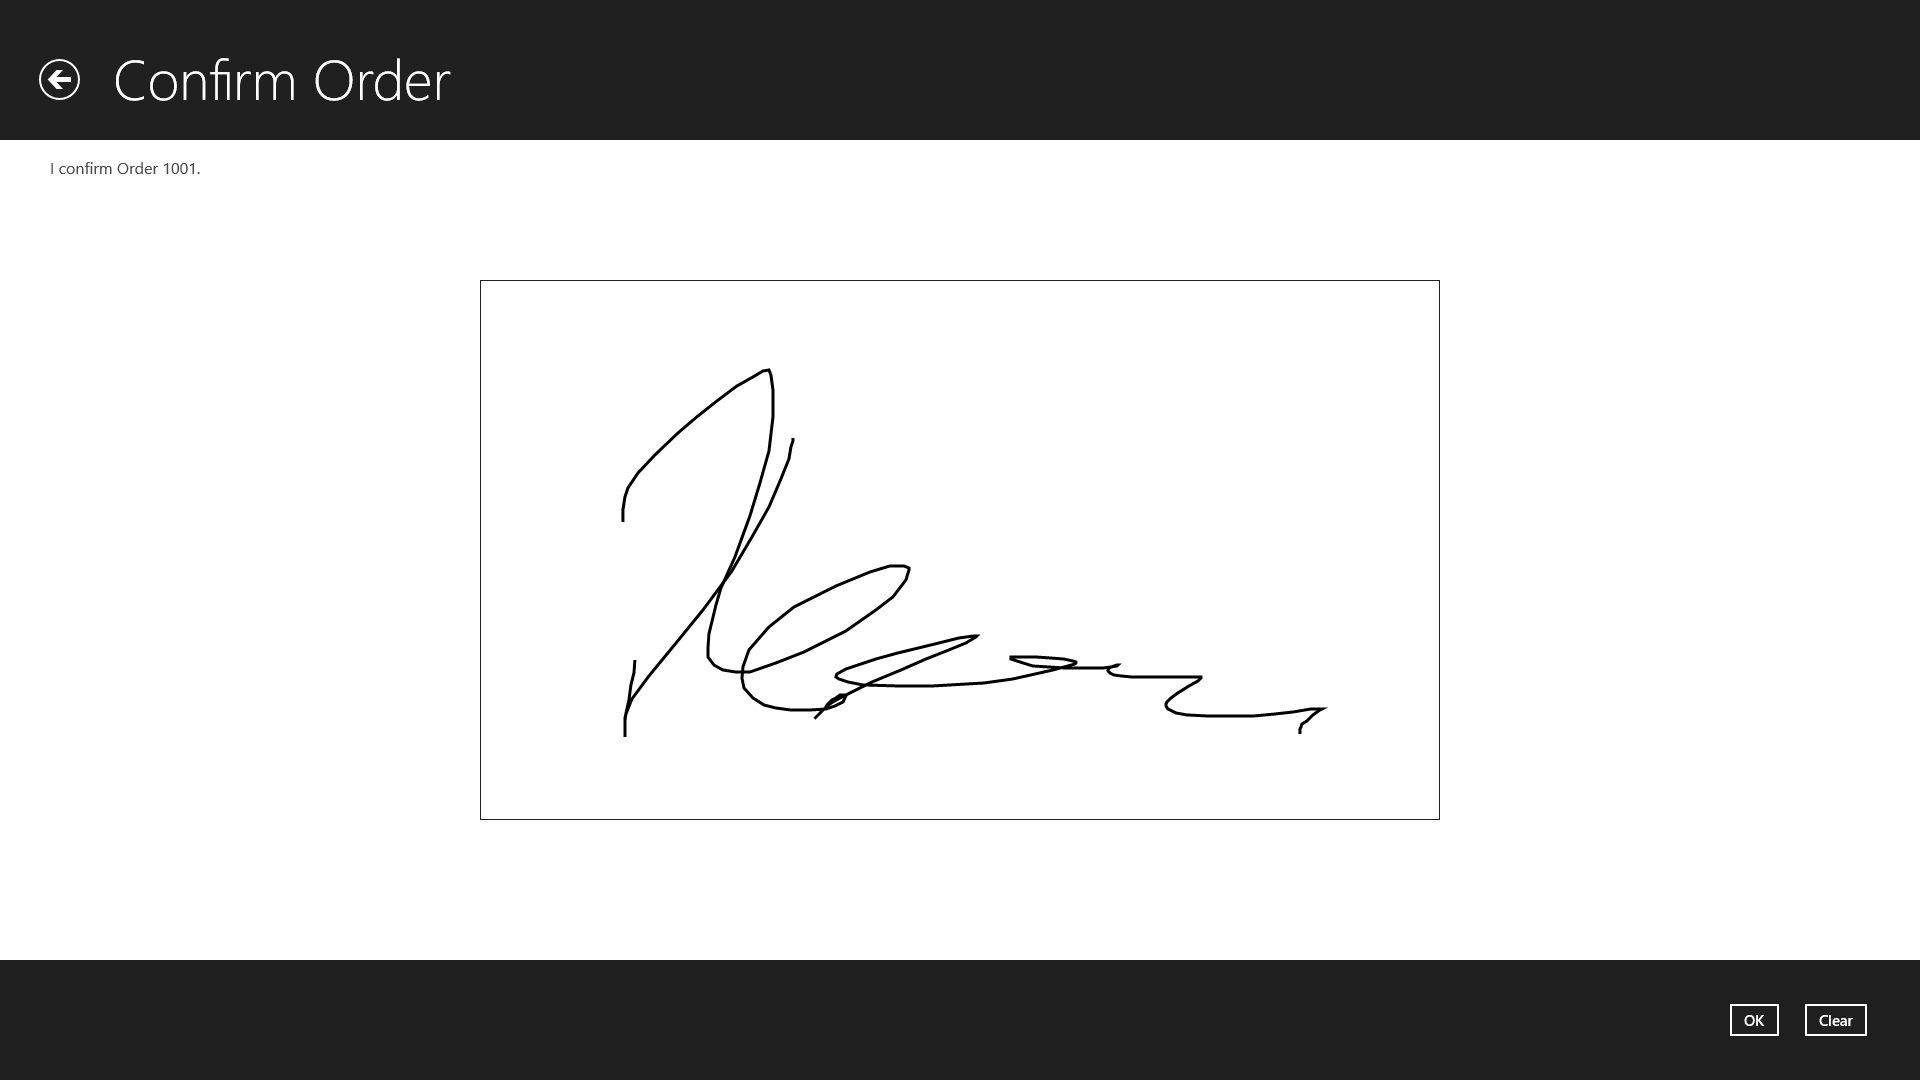 Signatures can be digitally recorded directly and assigned to the order.